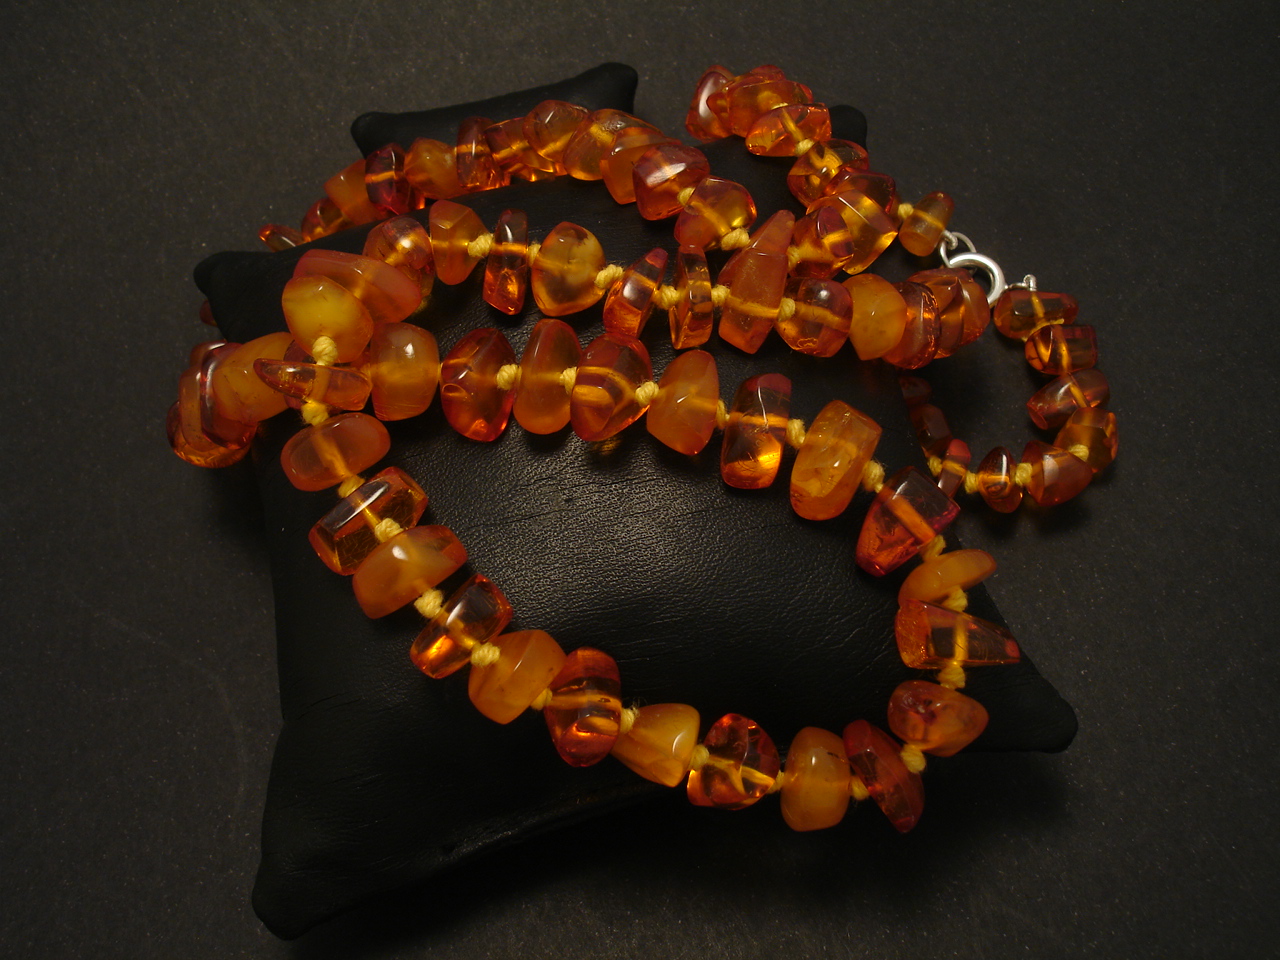 Vintage Amber Necklace - Necklaces from Cavendish Jewellers Ltd UK